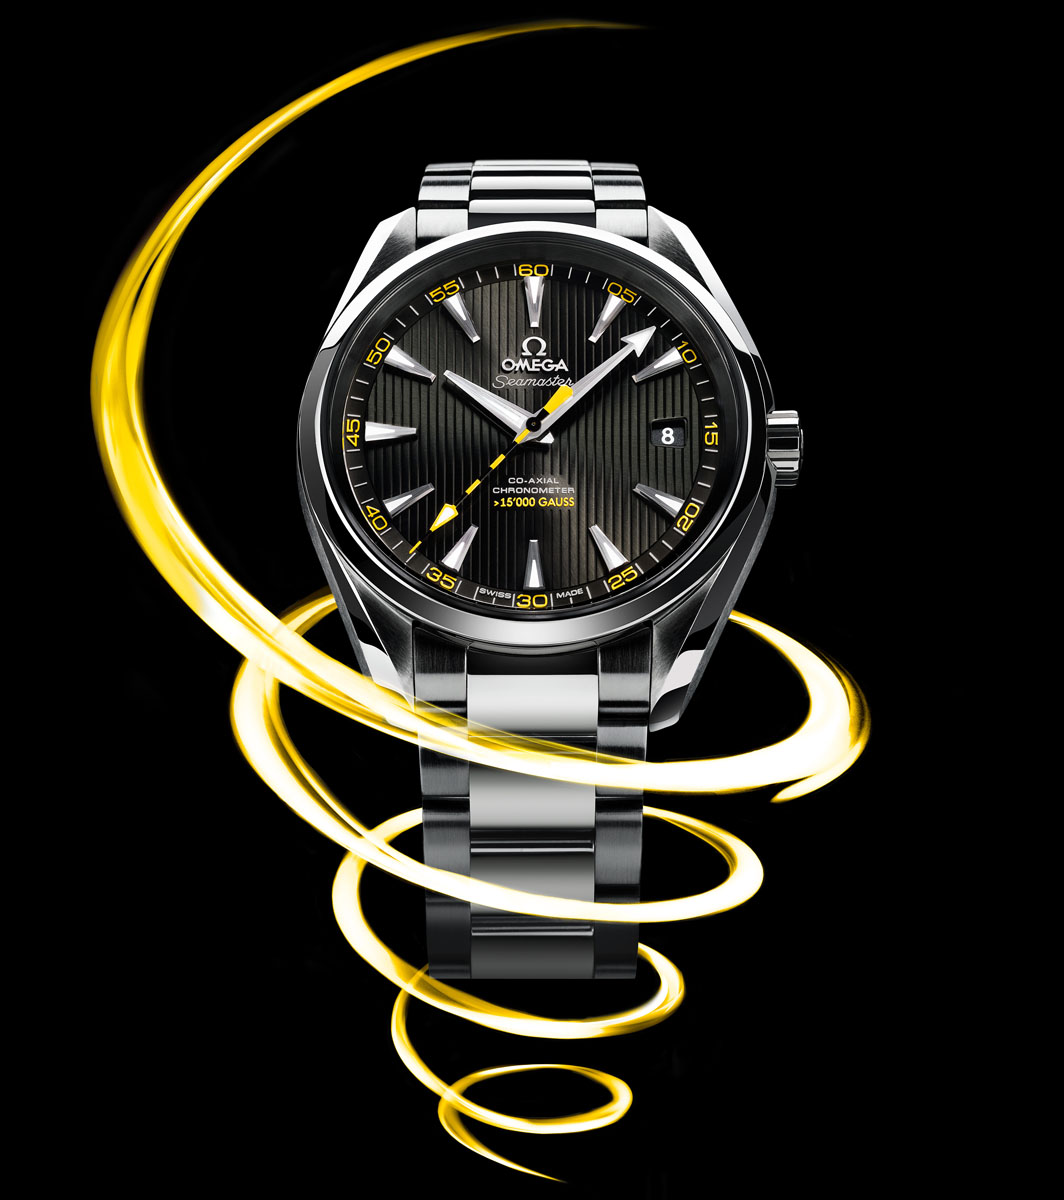 OMEGA Co-Axial 8508, a watch movement resistant to magnetic fields of more than 15,000 gauss